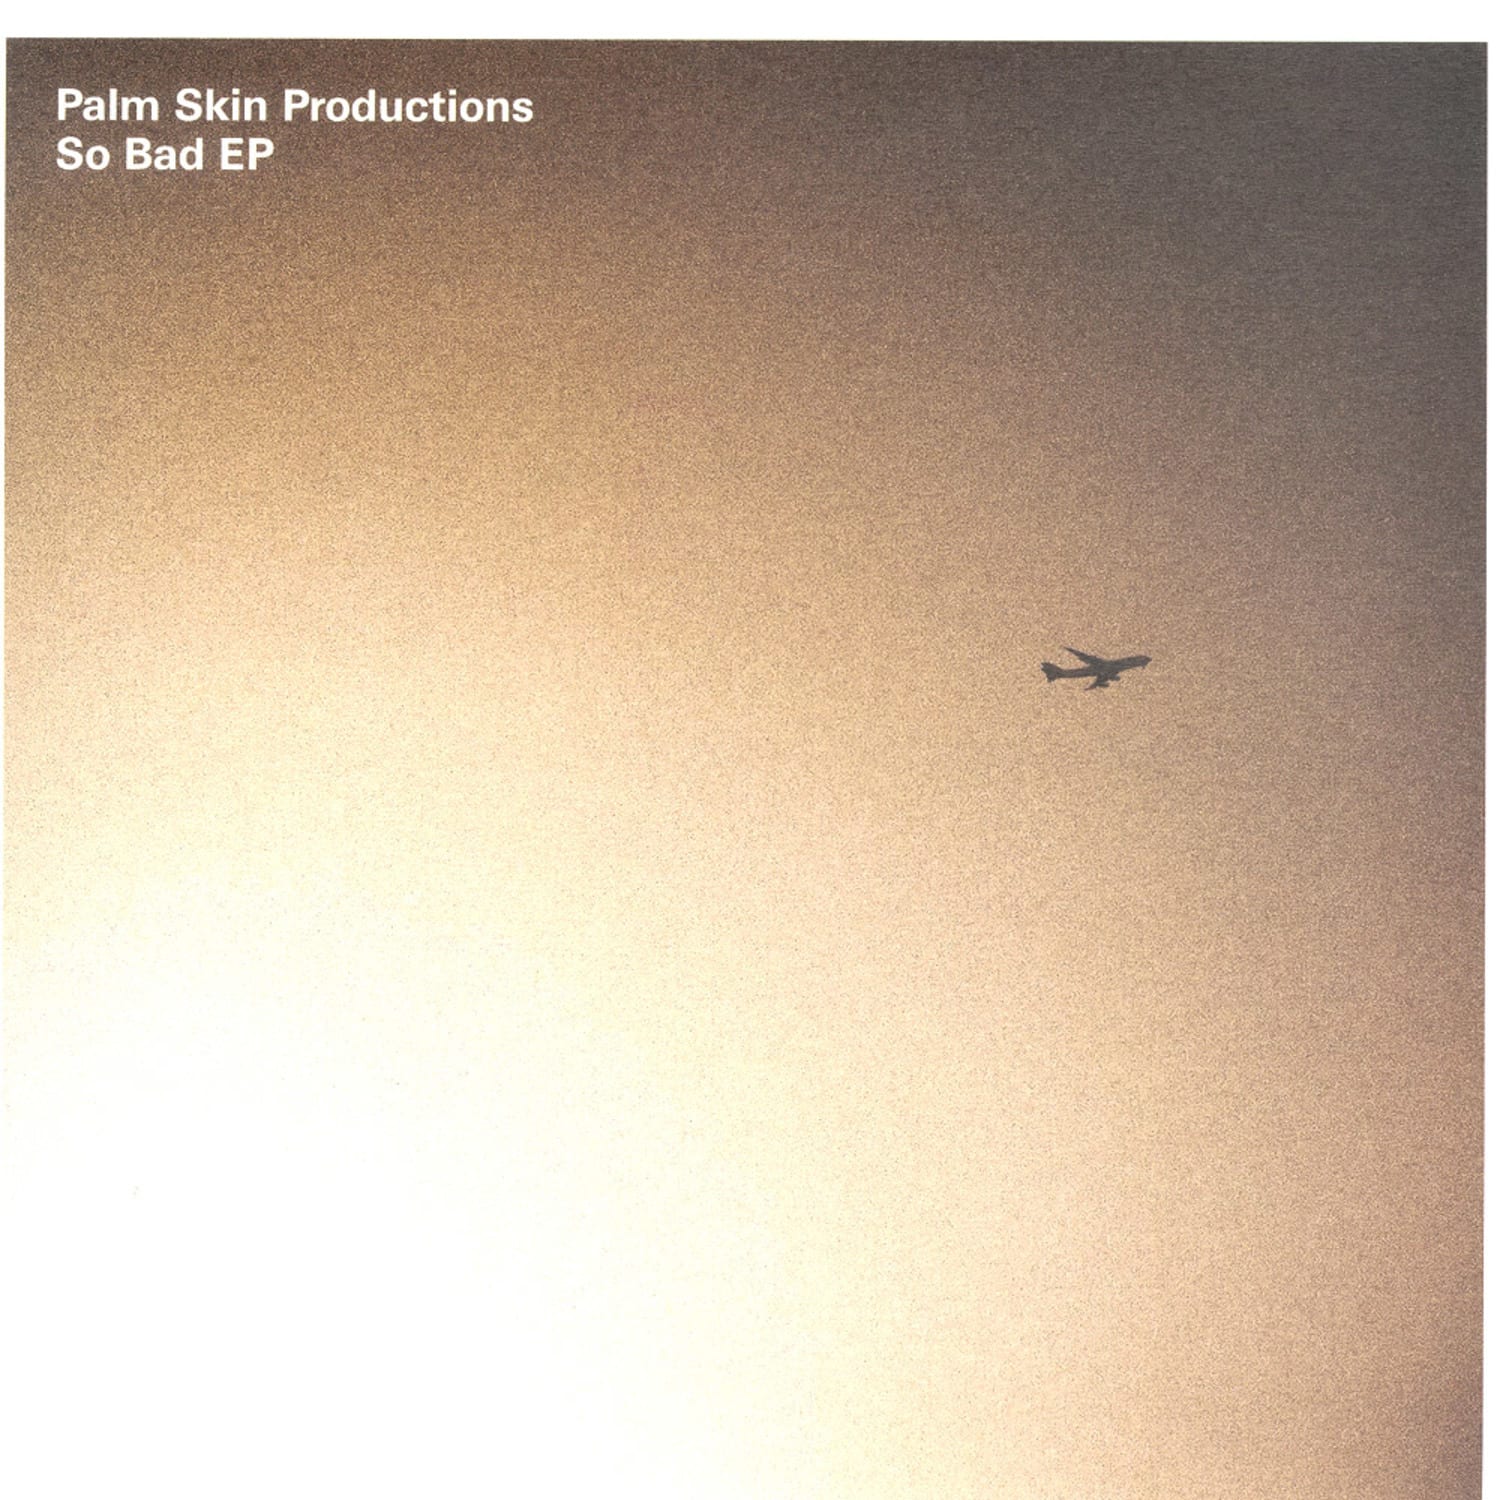 Palm Skin Productions - SO BAD EP